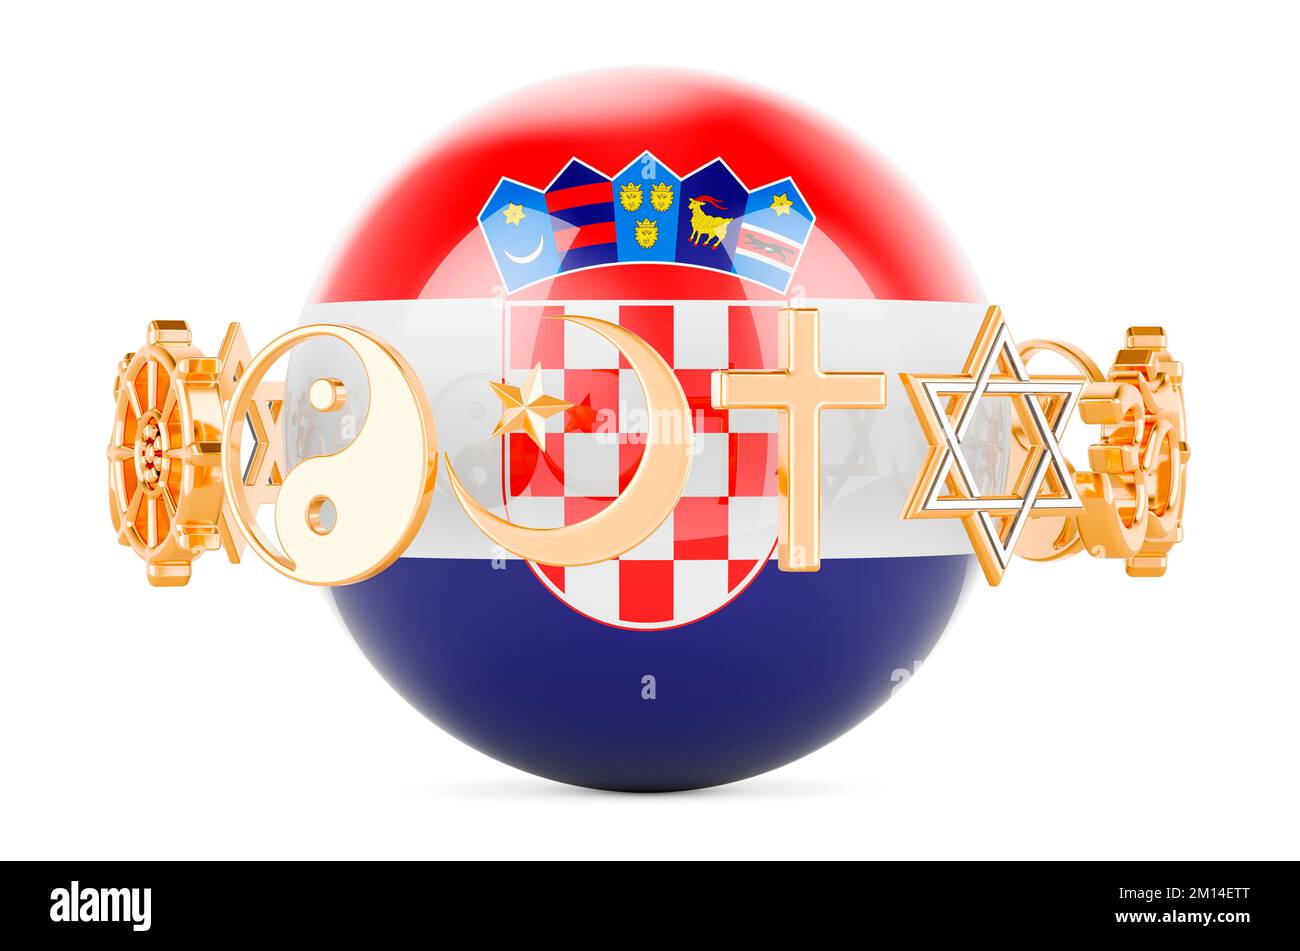 Croatian flag painted on sphere with religions symbols around, 3D rendering isolated on white background Stock Photo